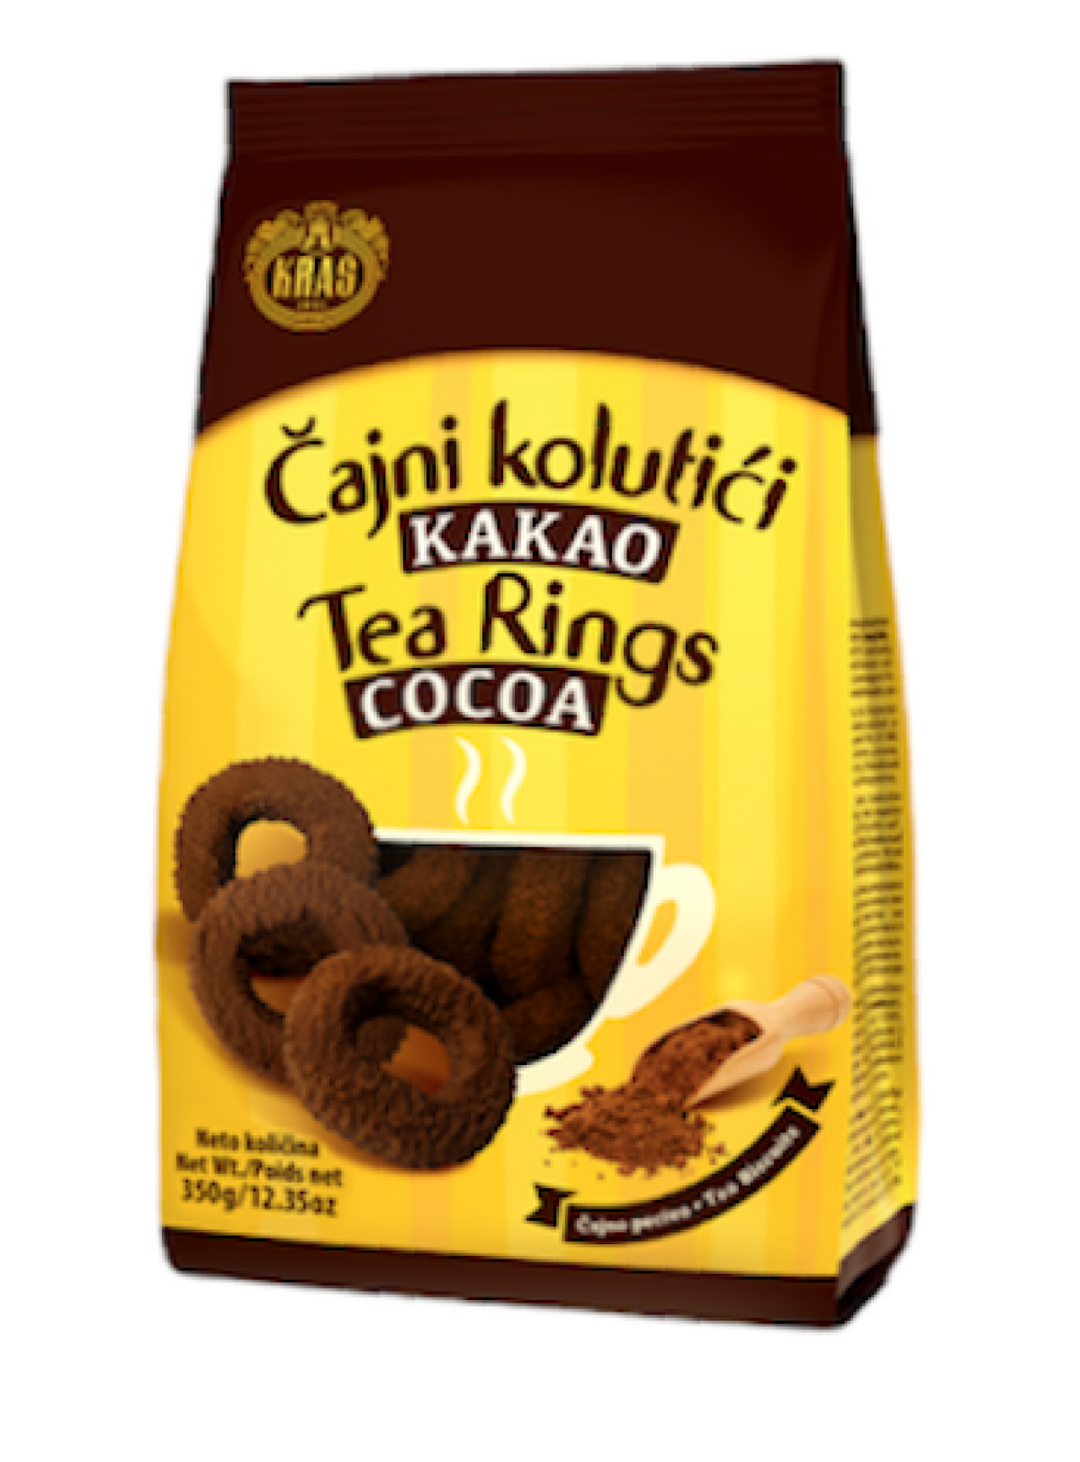 Cocoa Tea Rings biscuits - Kras - 350g